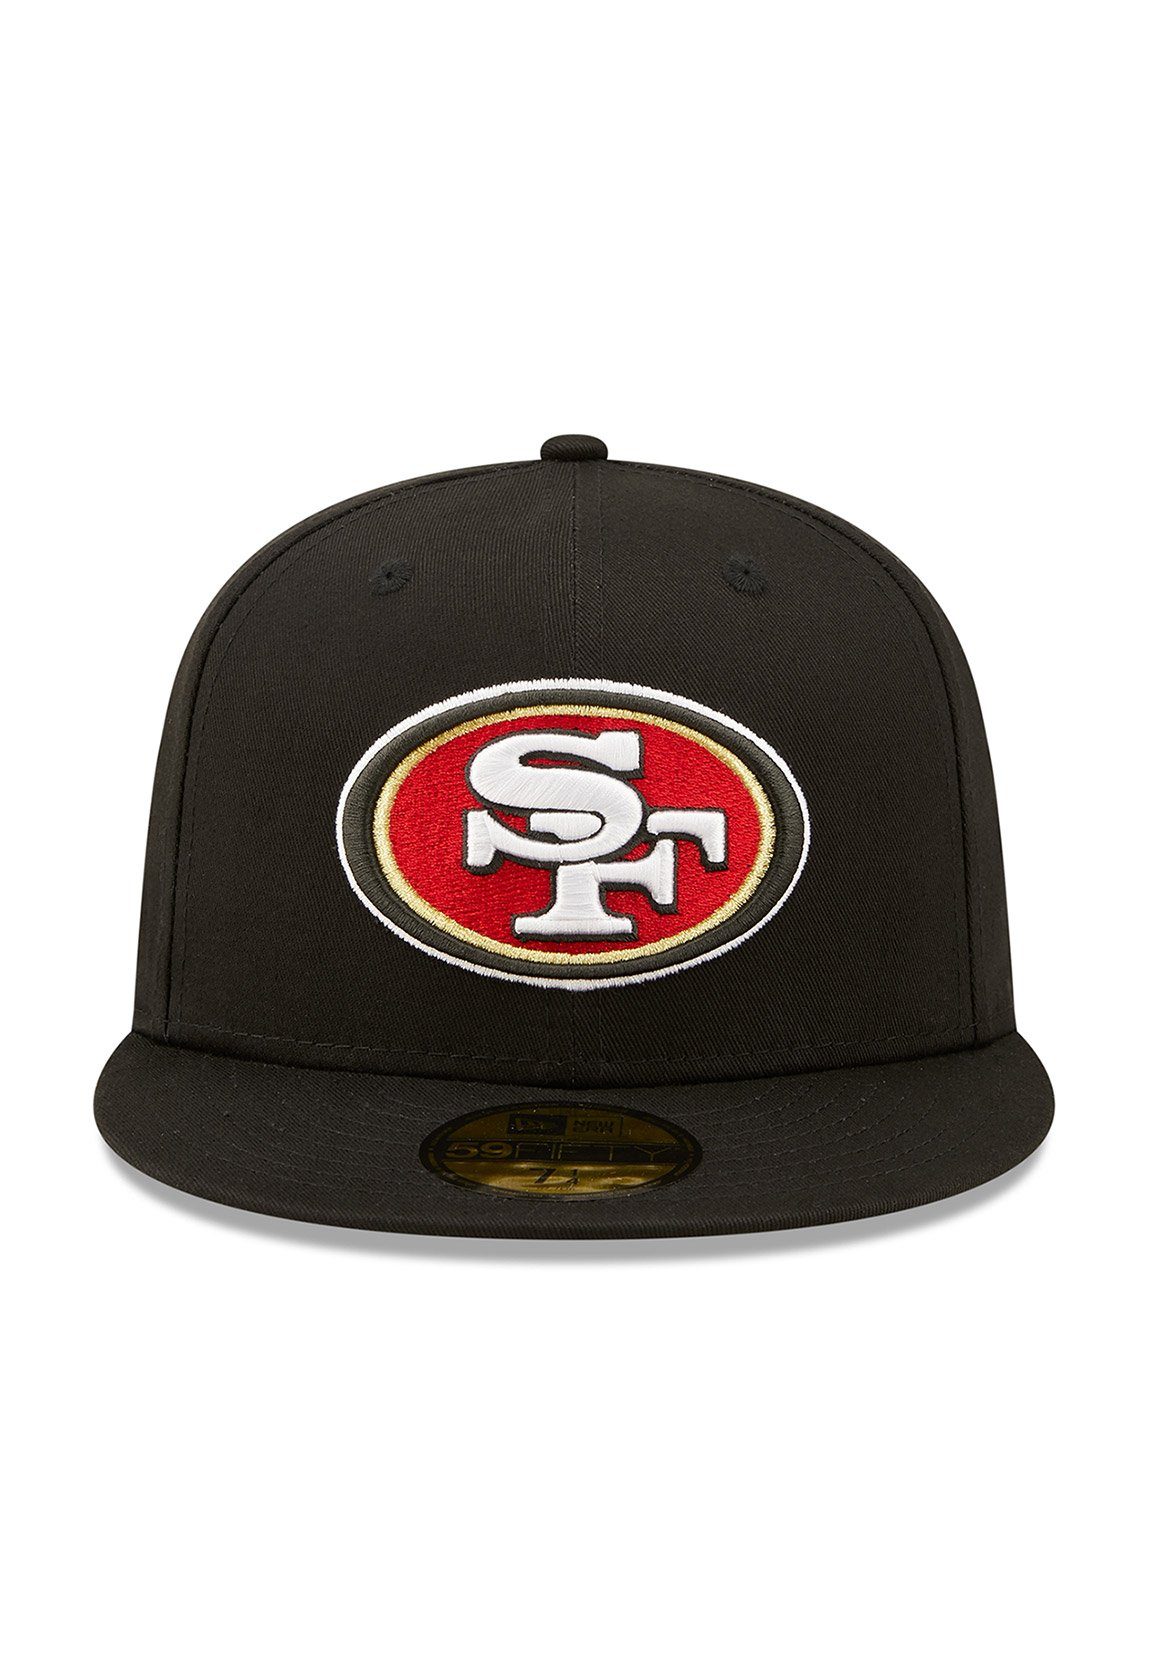 Era Cap New Patch FRANCISCO New SAN Fitted Schwarz 49ers 59Fifty Side